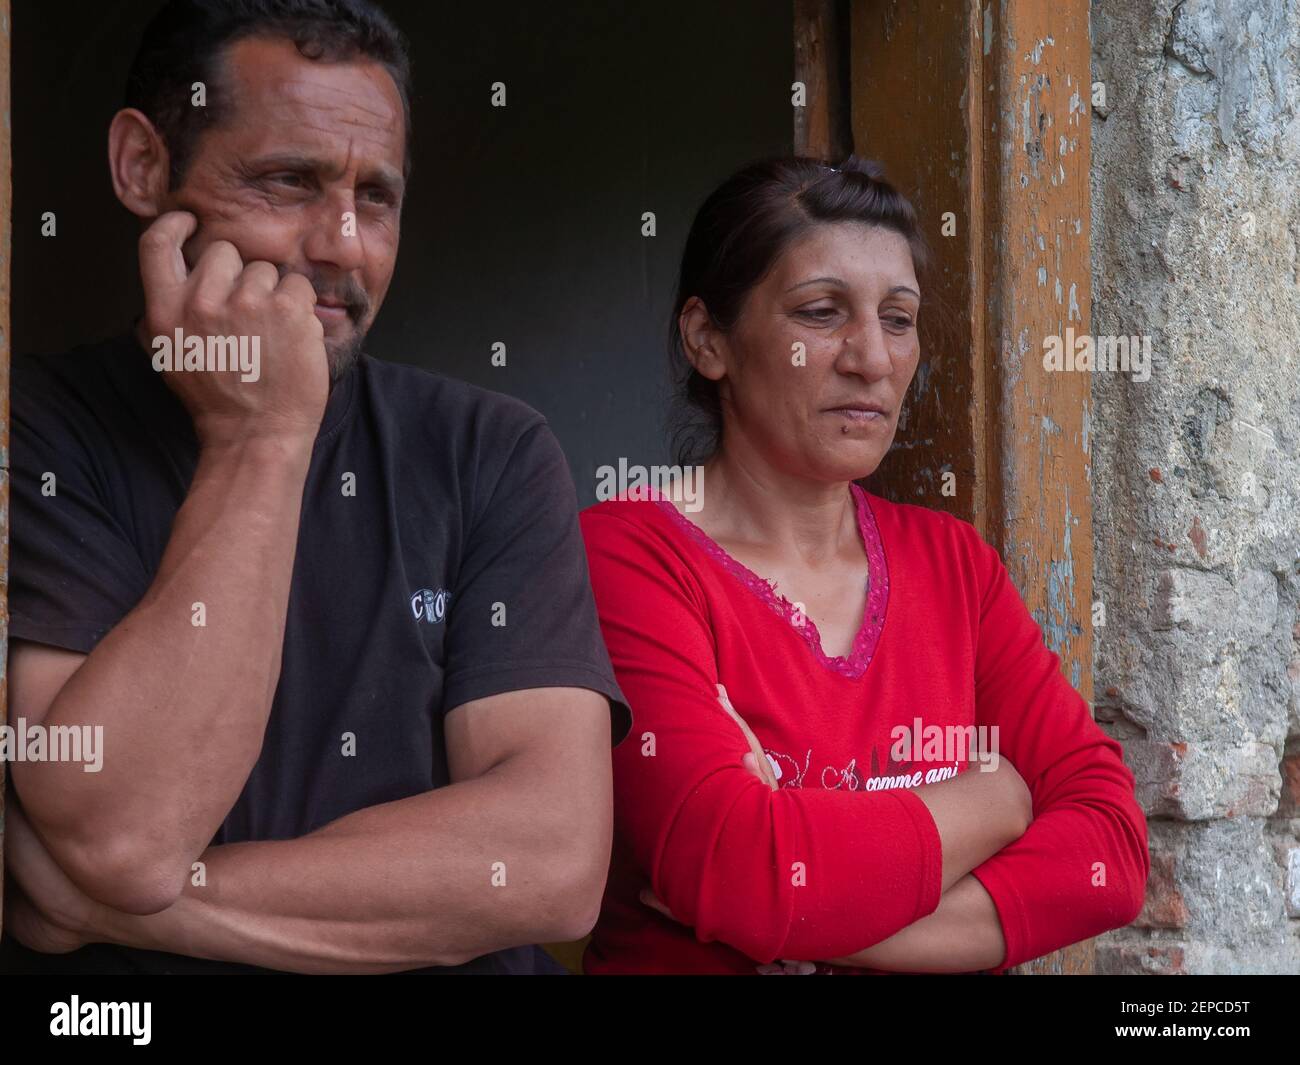 Lomnicka, Slovakia. 05-16-2018. Gypsy parents living in misery and poverty in a abandoned Roma community in the heart of Slovakia. Stock Photo